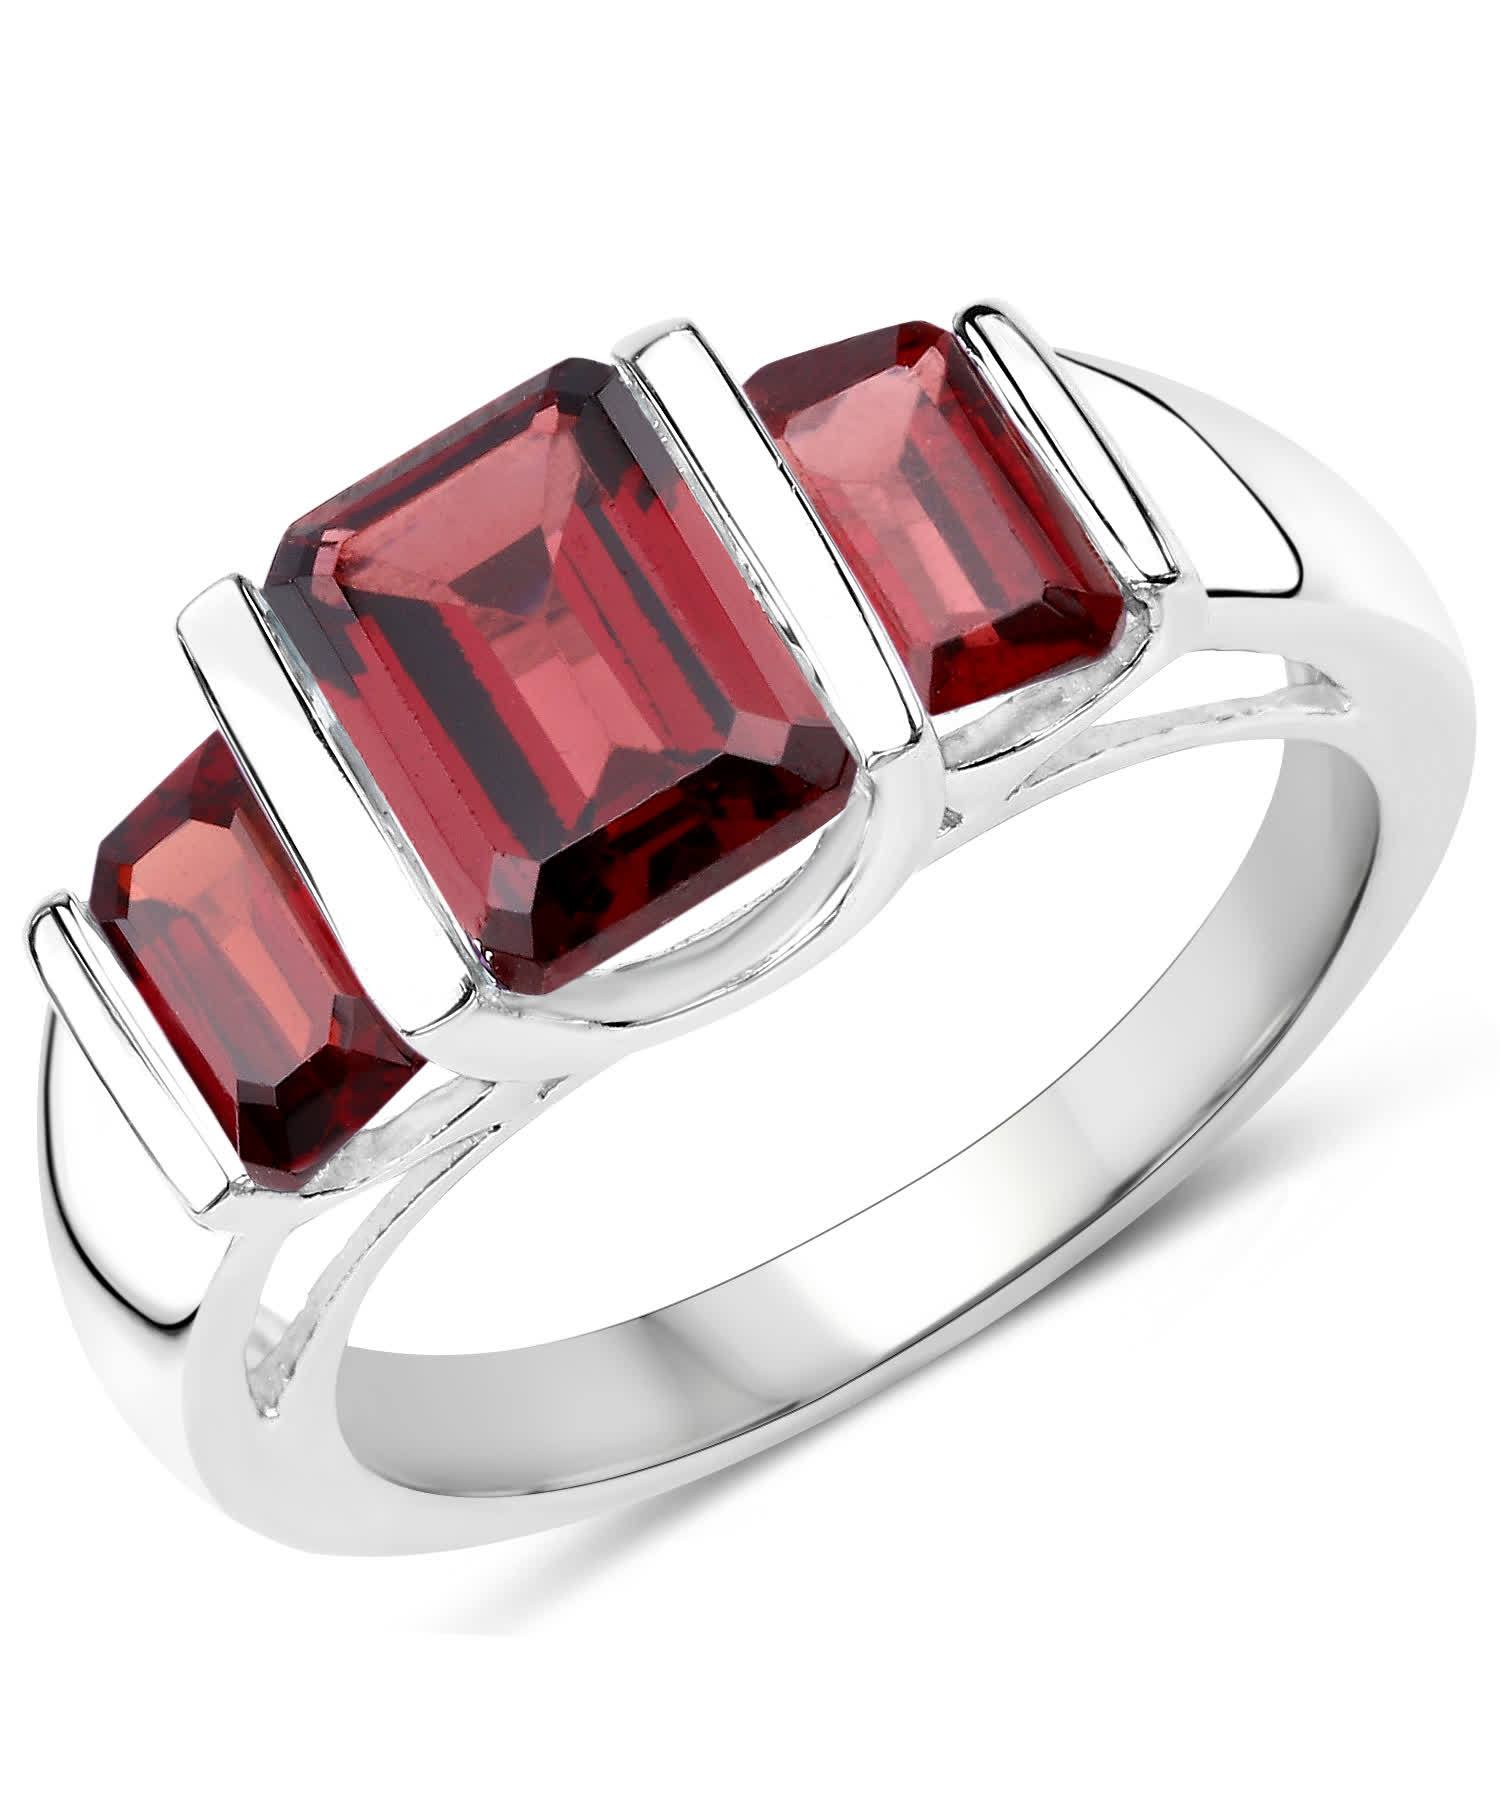 3.45ctw Natural Garnet Rhodium Plated 925 Sterling Silver Three-Stone Right Hand Ring View 1